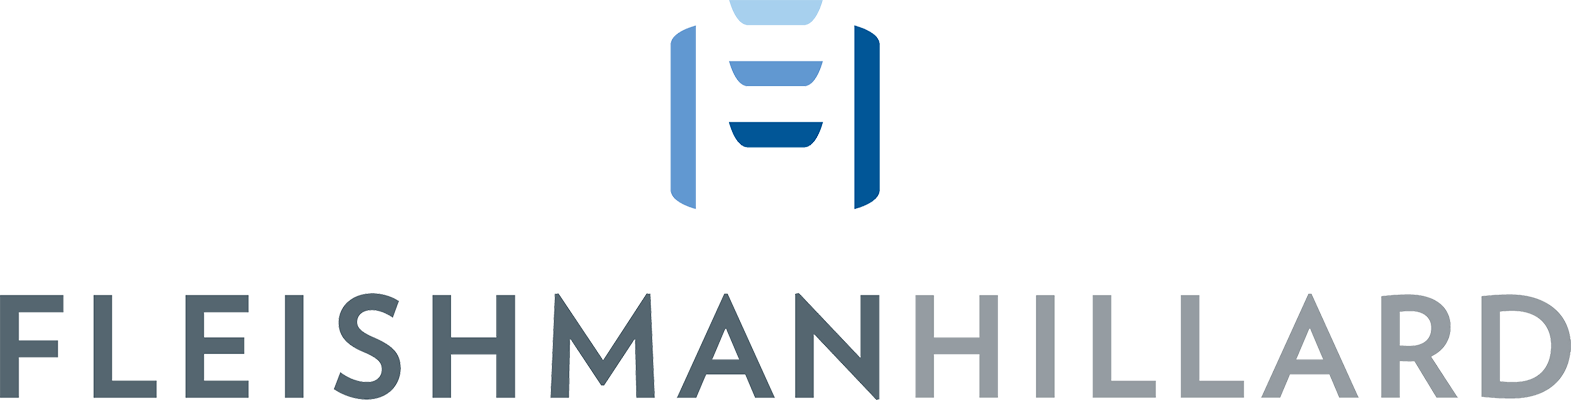 The logo for Fleshman Willard portrays their strong commitment to health equity and communities.